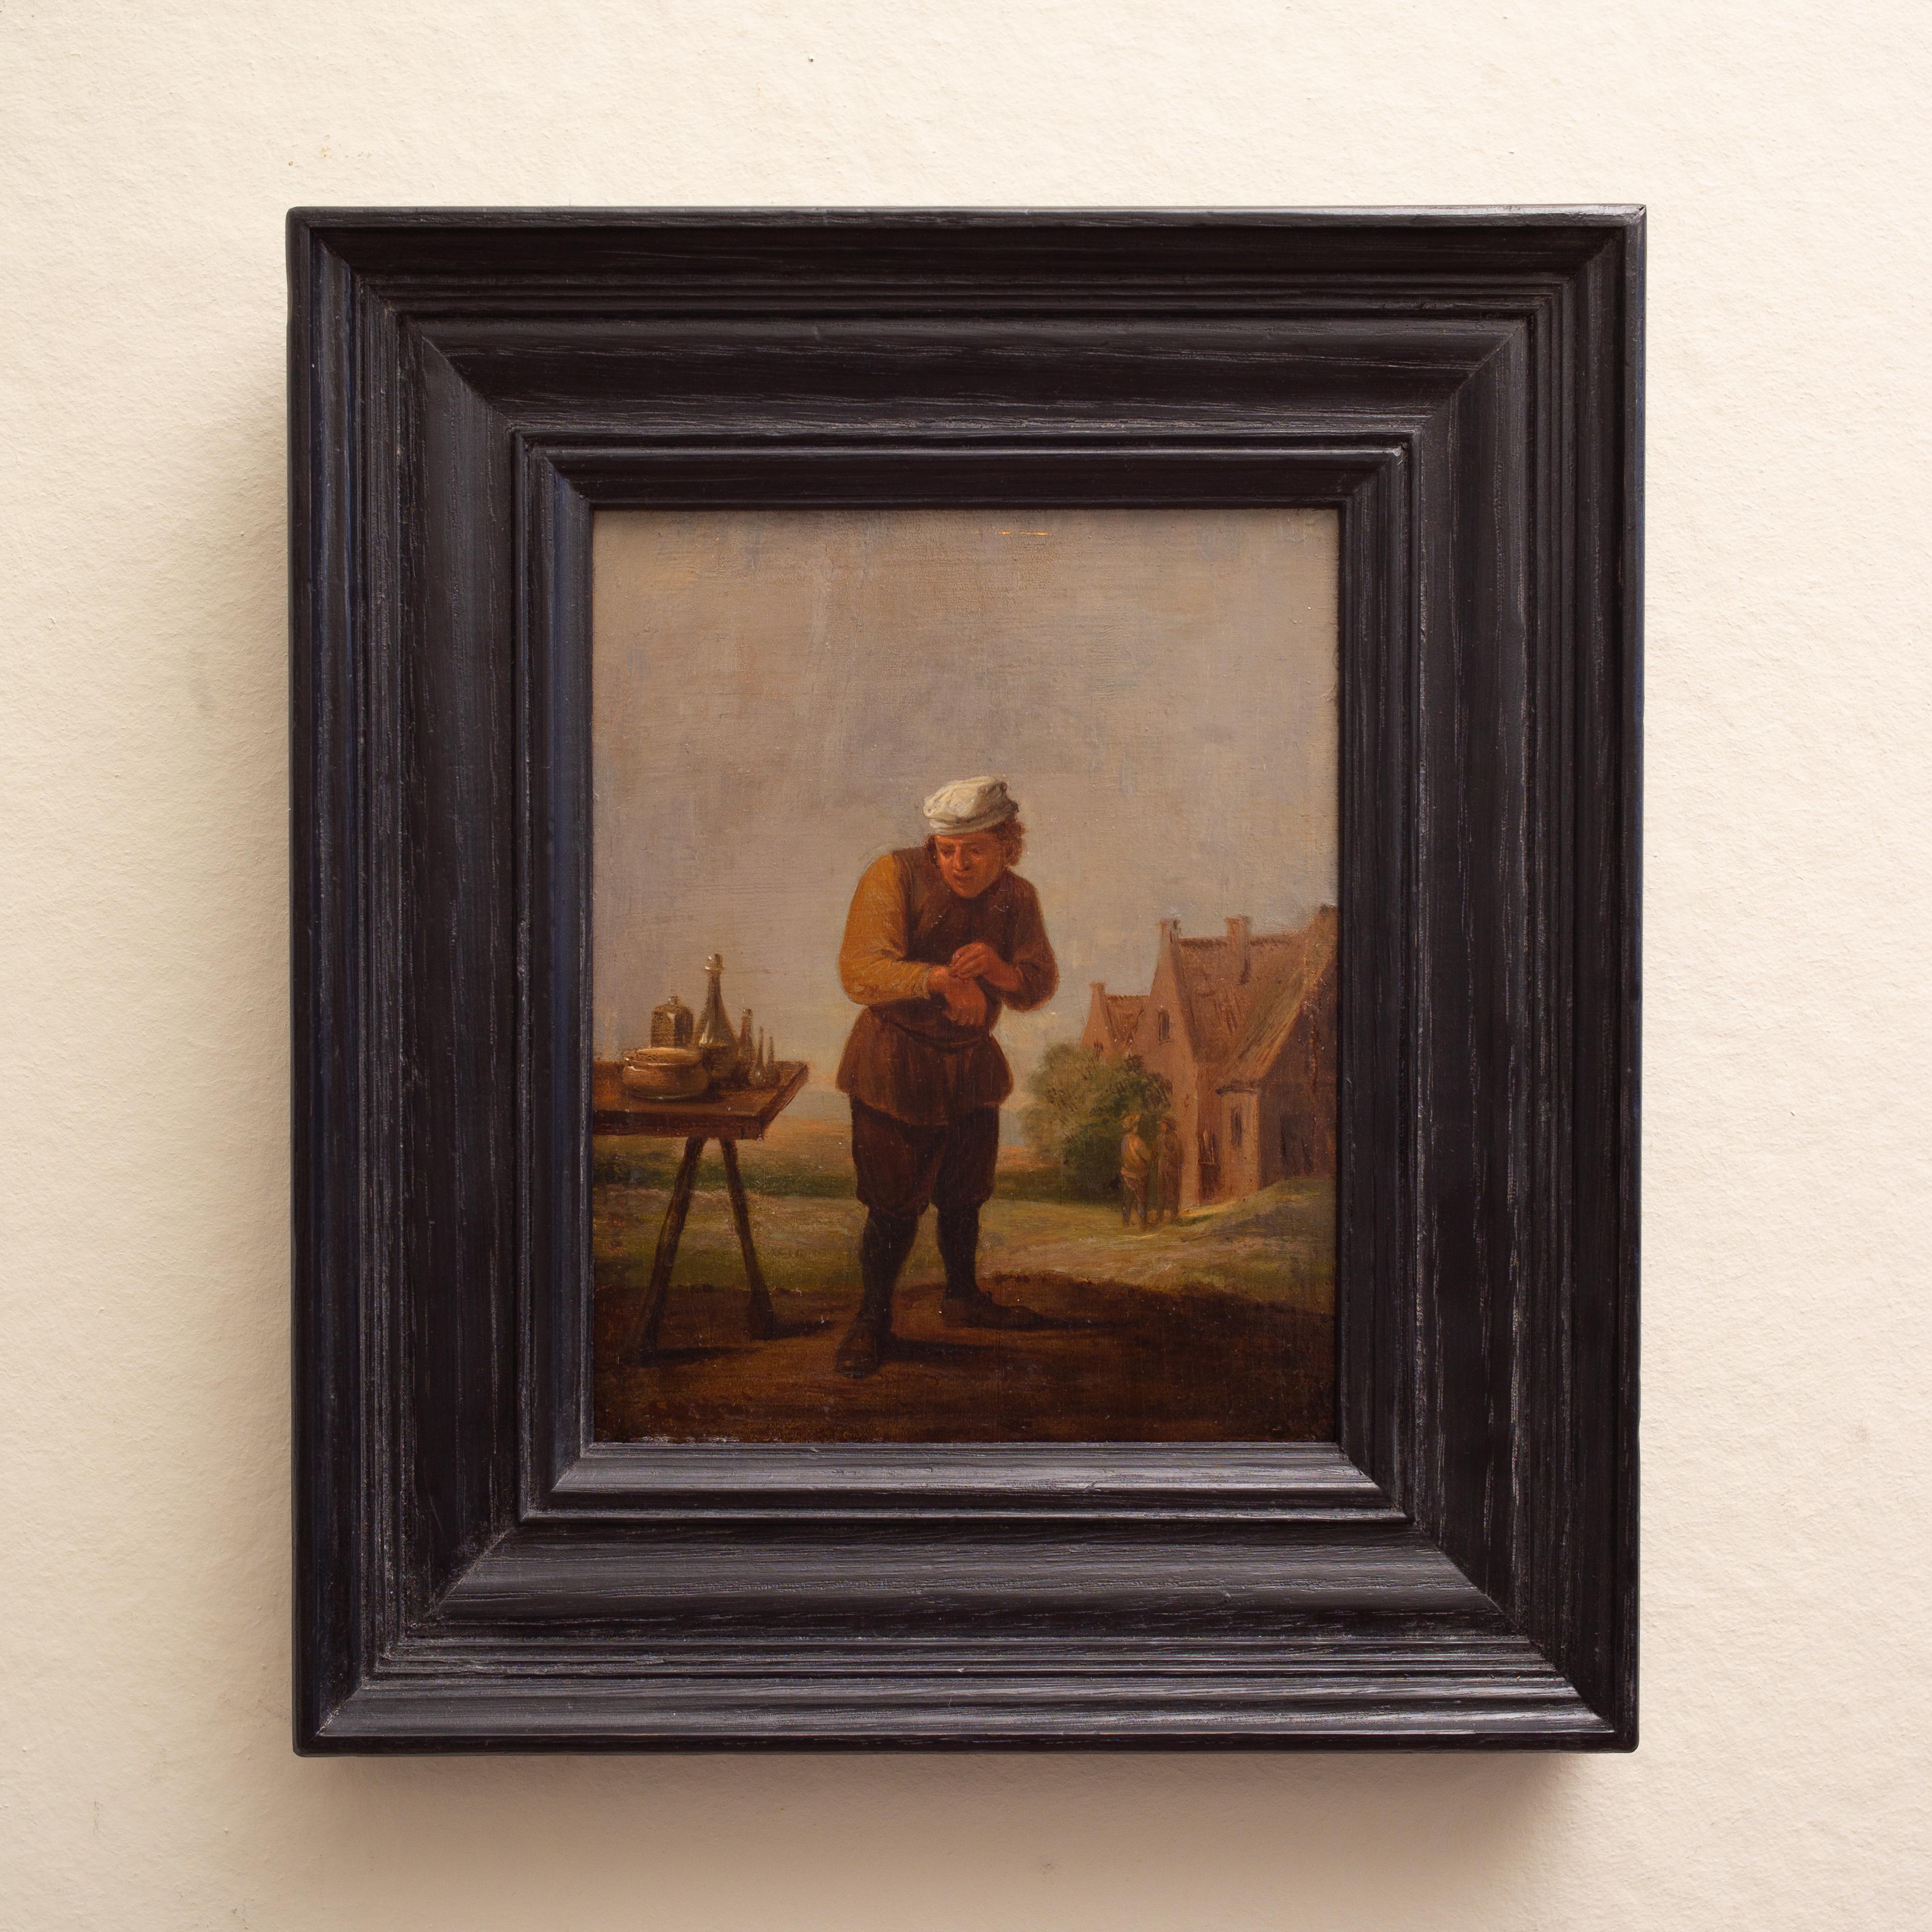 A Peasant Removing a Plaster: The Sense of Touch. By a Follower of David Teniers